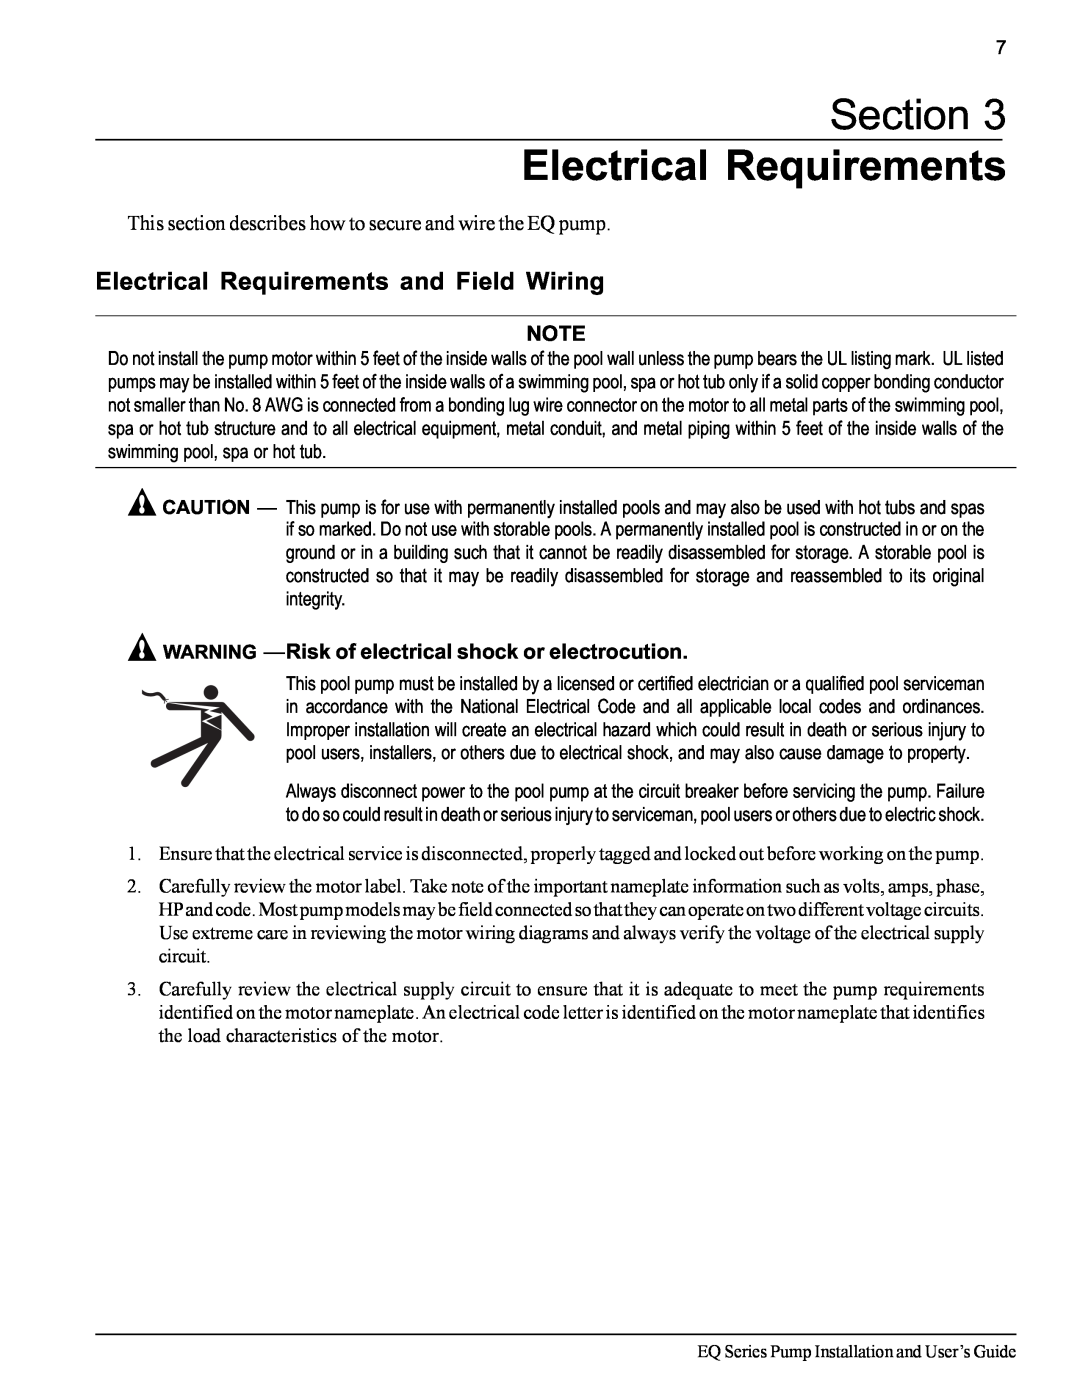 Pentair EQ SERIES important safety instructions Section Electrical Requirements, Electrical Requirements and Field Wiring 